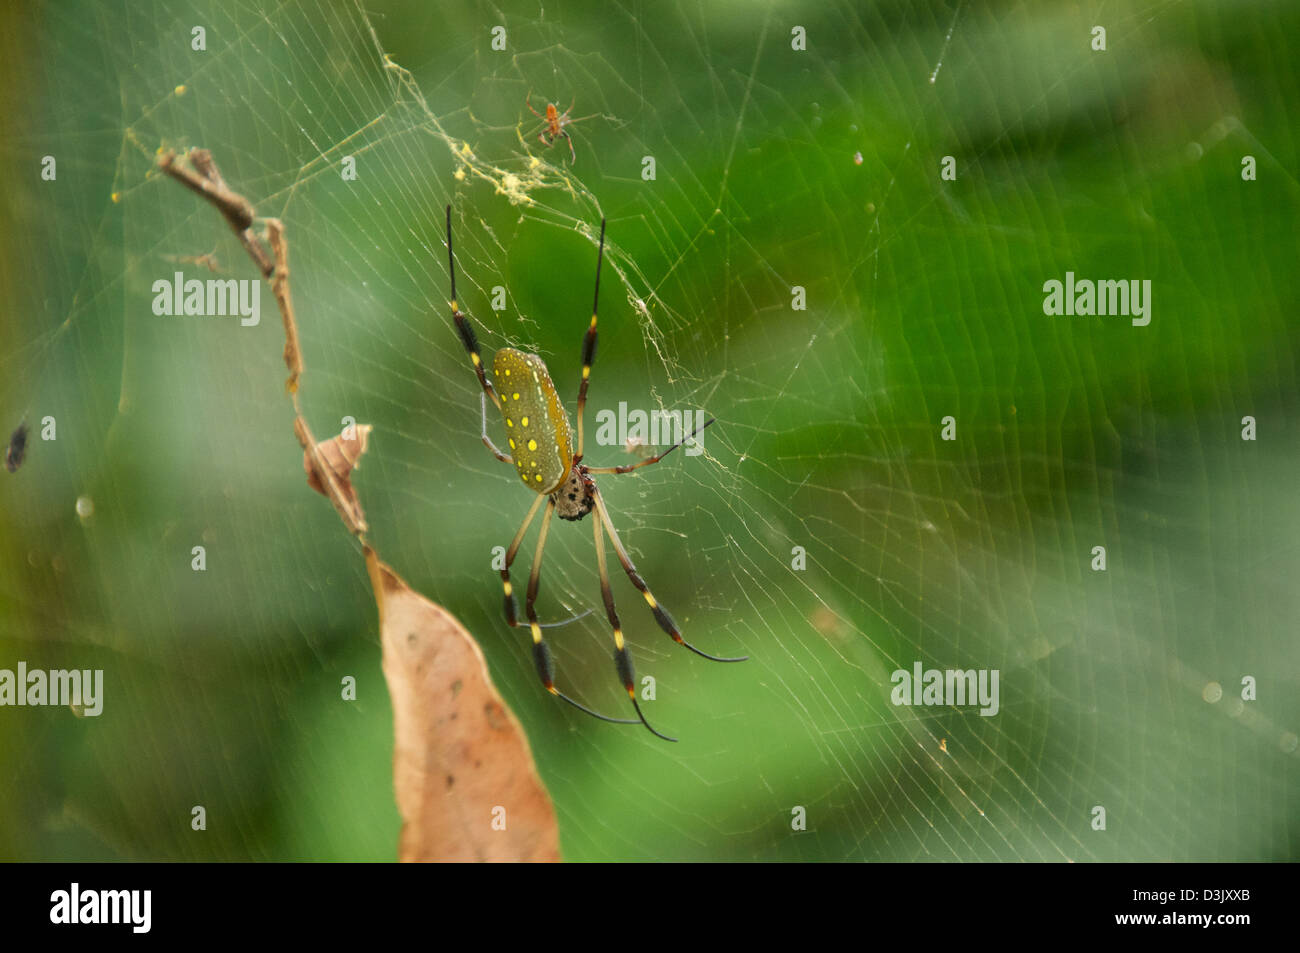 Golden Orb spider in Costa Rica forest Stock Photo